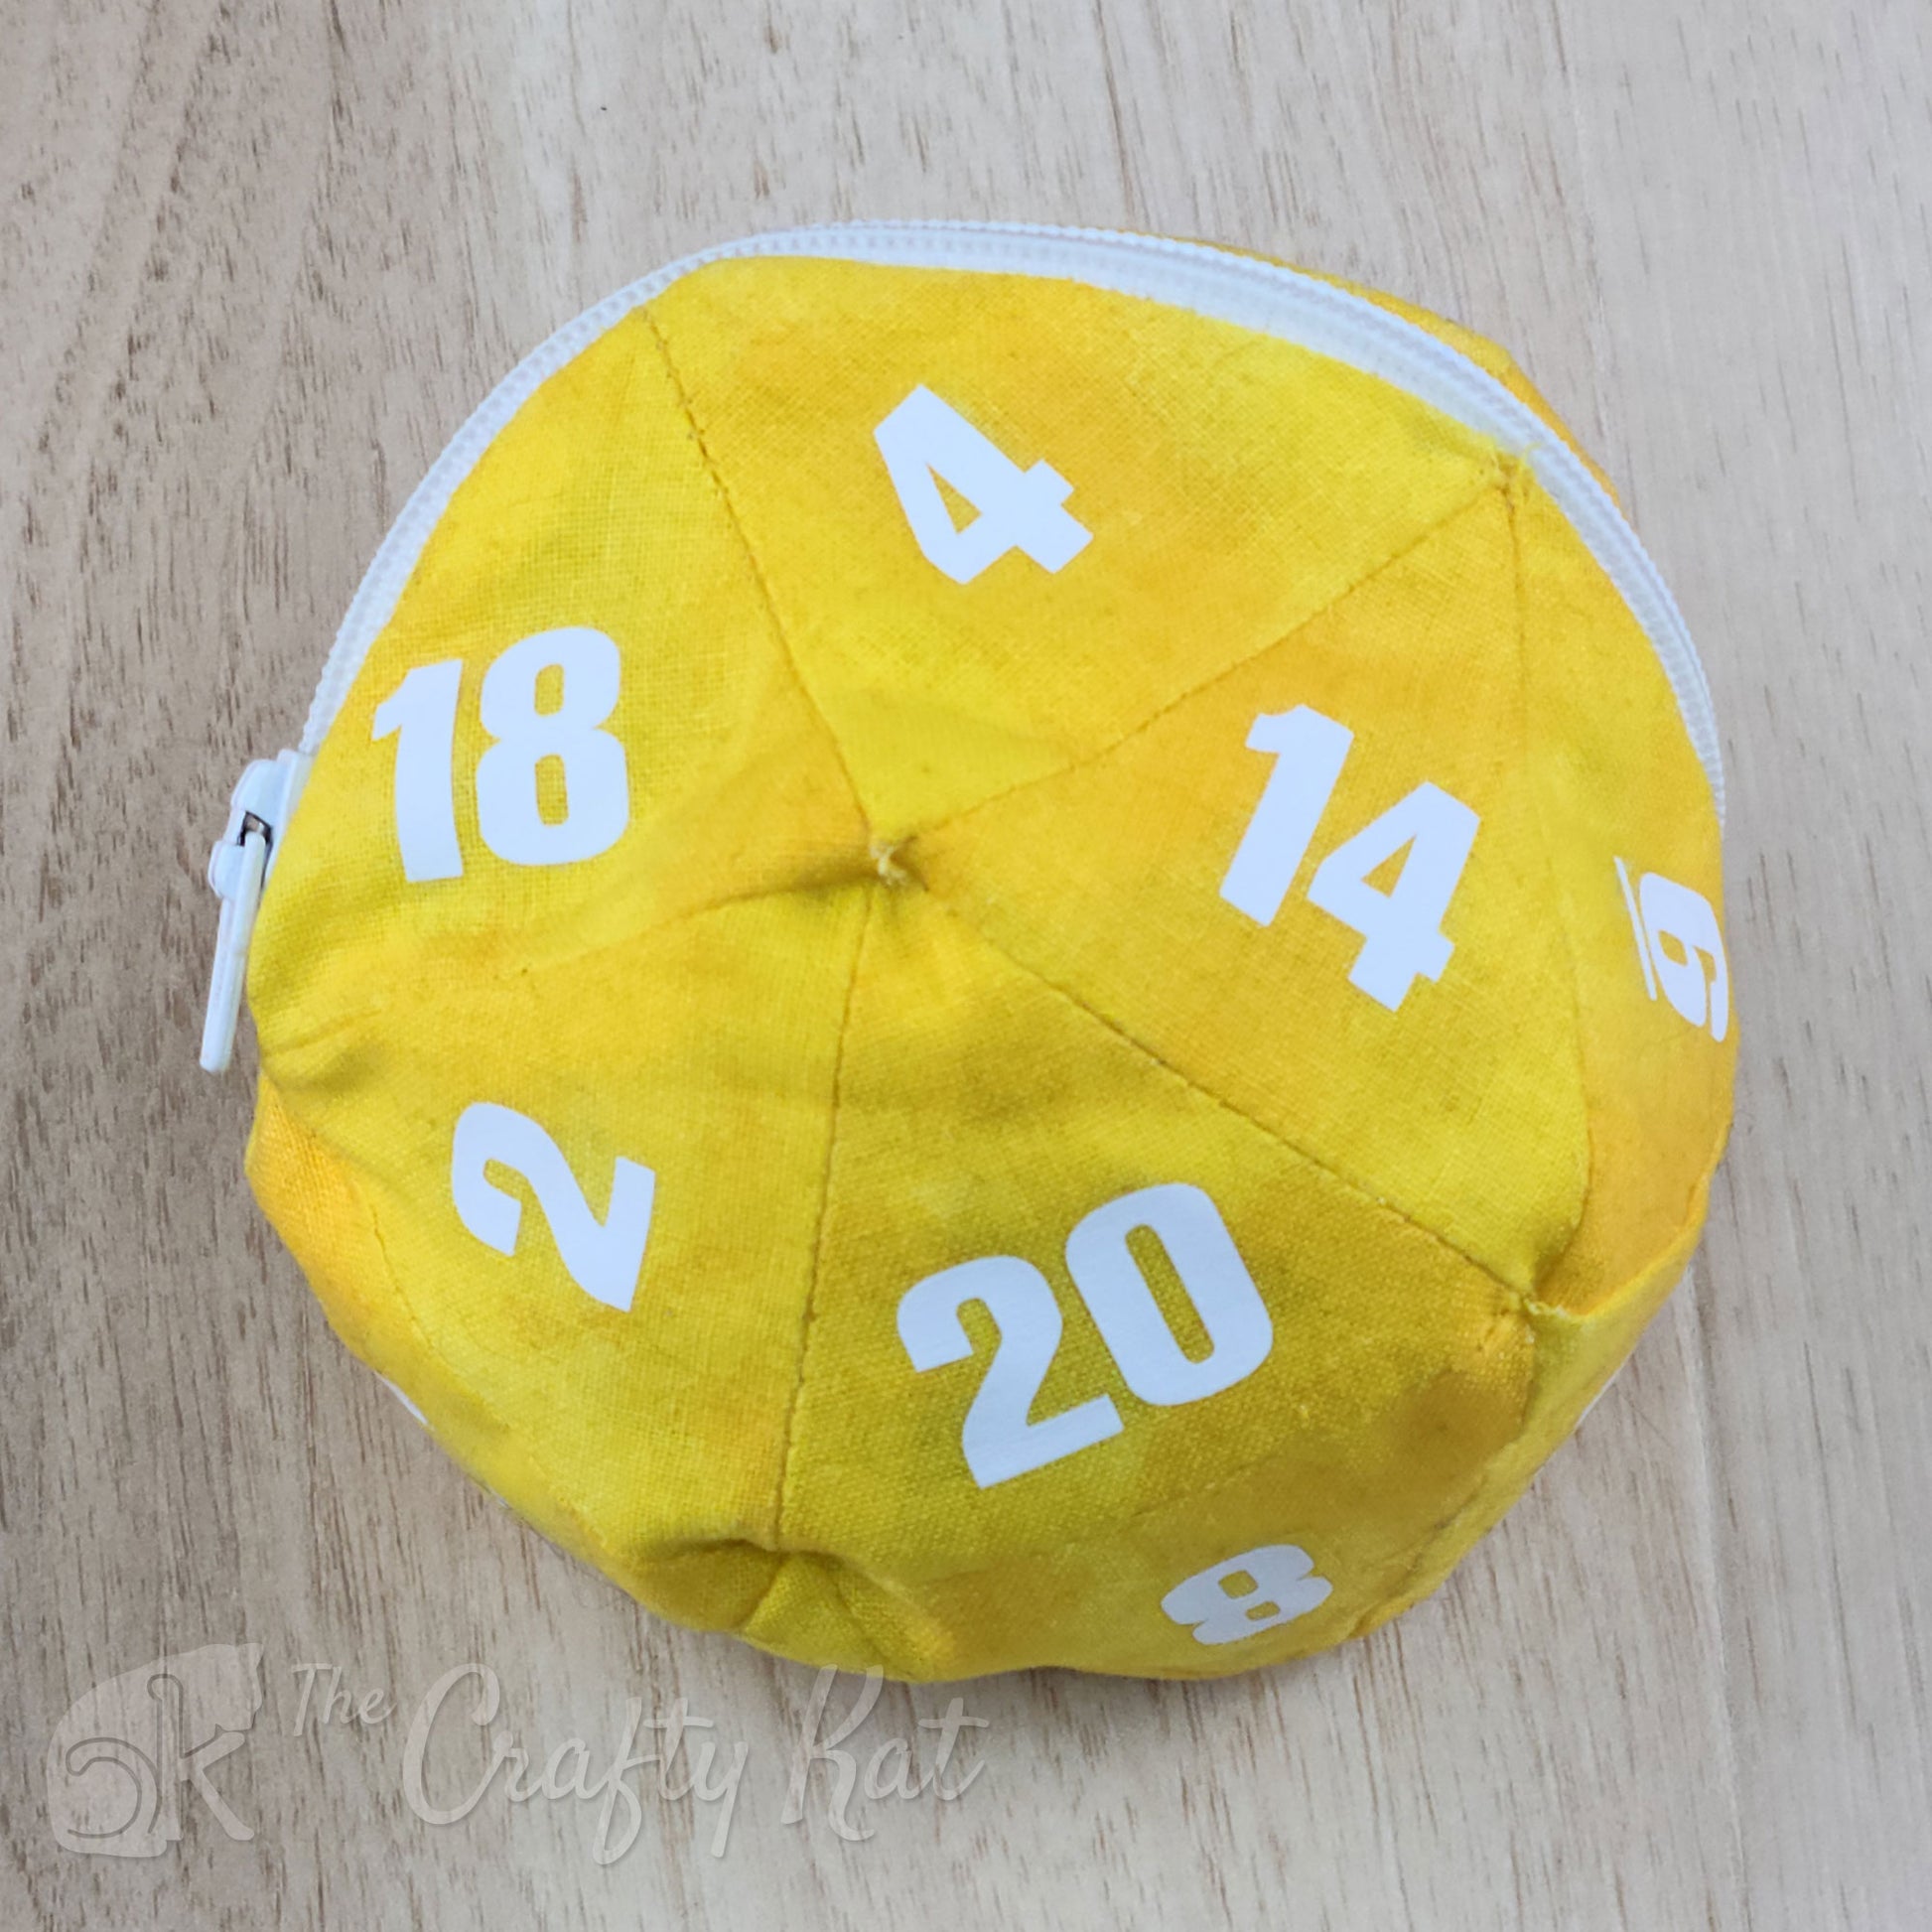 A zippered cotton pouch in the shape of a twenty-sided die, commonly referred to as a d20. The bag shown is yellow with white numbers.